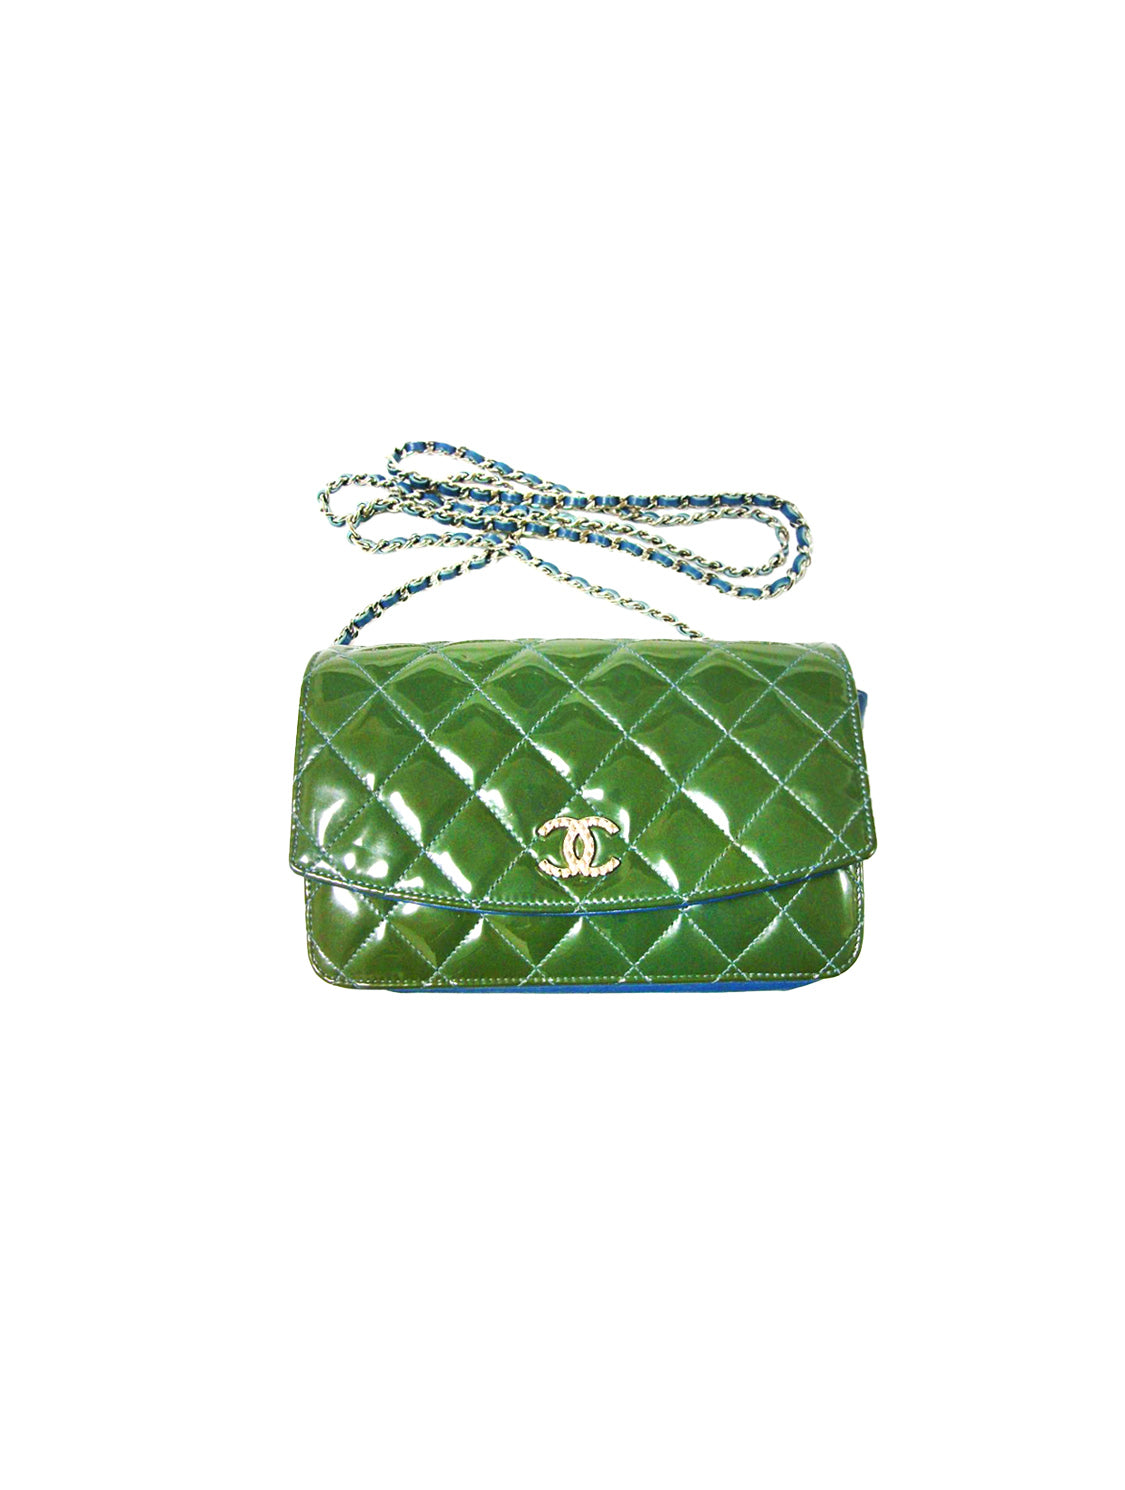 Chanel Rare FW 2011 Green Vinyl Patent Wallet on Chain